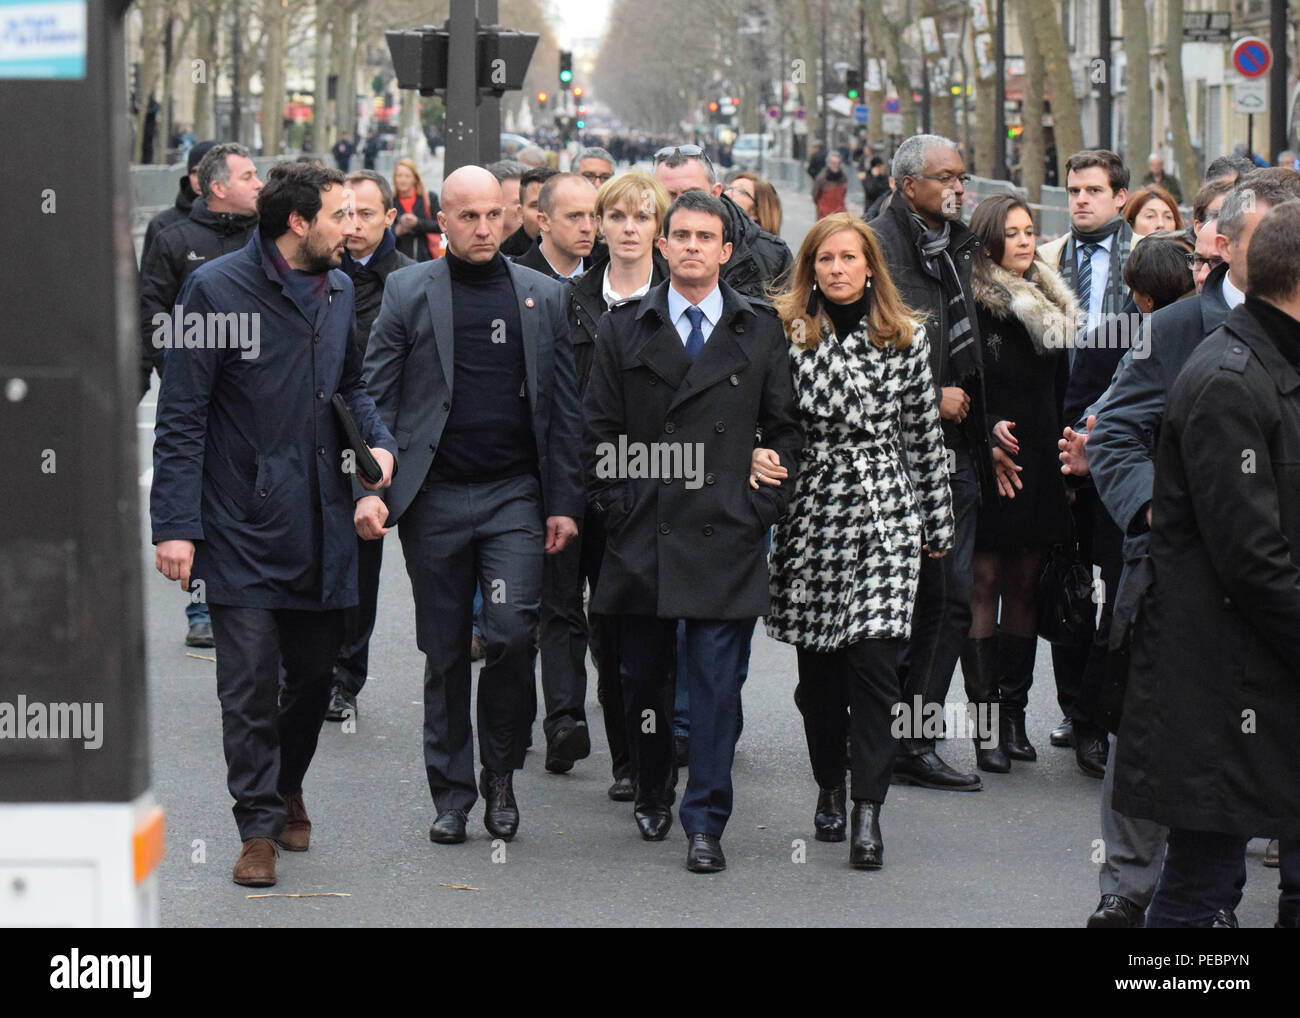 January 11, 2015 - Paris, France:  French Prime minister Manuel Valls and his wife Anne Gravoin take part in a unity march following the deadly Paris attacks. Four million people demonstrated across the country in a 'Marche Republicaine' (Republican March) celebrating the nation's unity in face of terrorist threats. Thousands of people had banners or cartoons referring to Charlie Hebdo, the satirical magazine whose office was targeted by Islamist gunmen earlier in the week. La grande marche republicaine en hommage aux victimes de l'attentat contre Charlie Hebdo a rassemble pres de 2 millions d Stock Photo